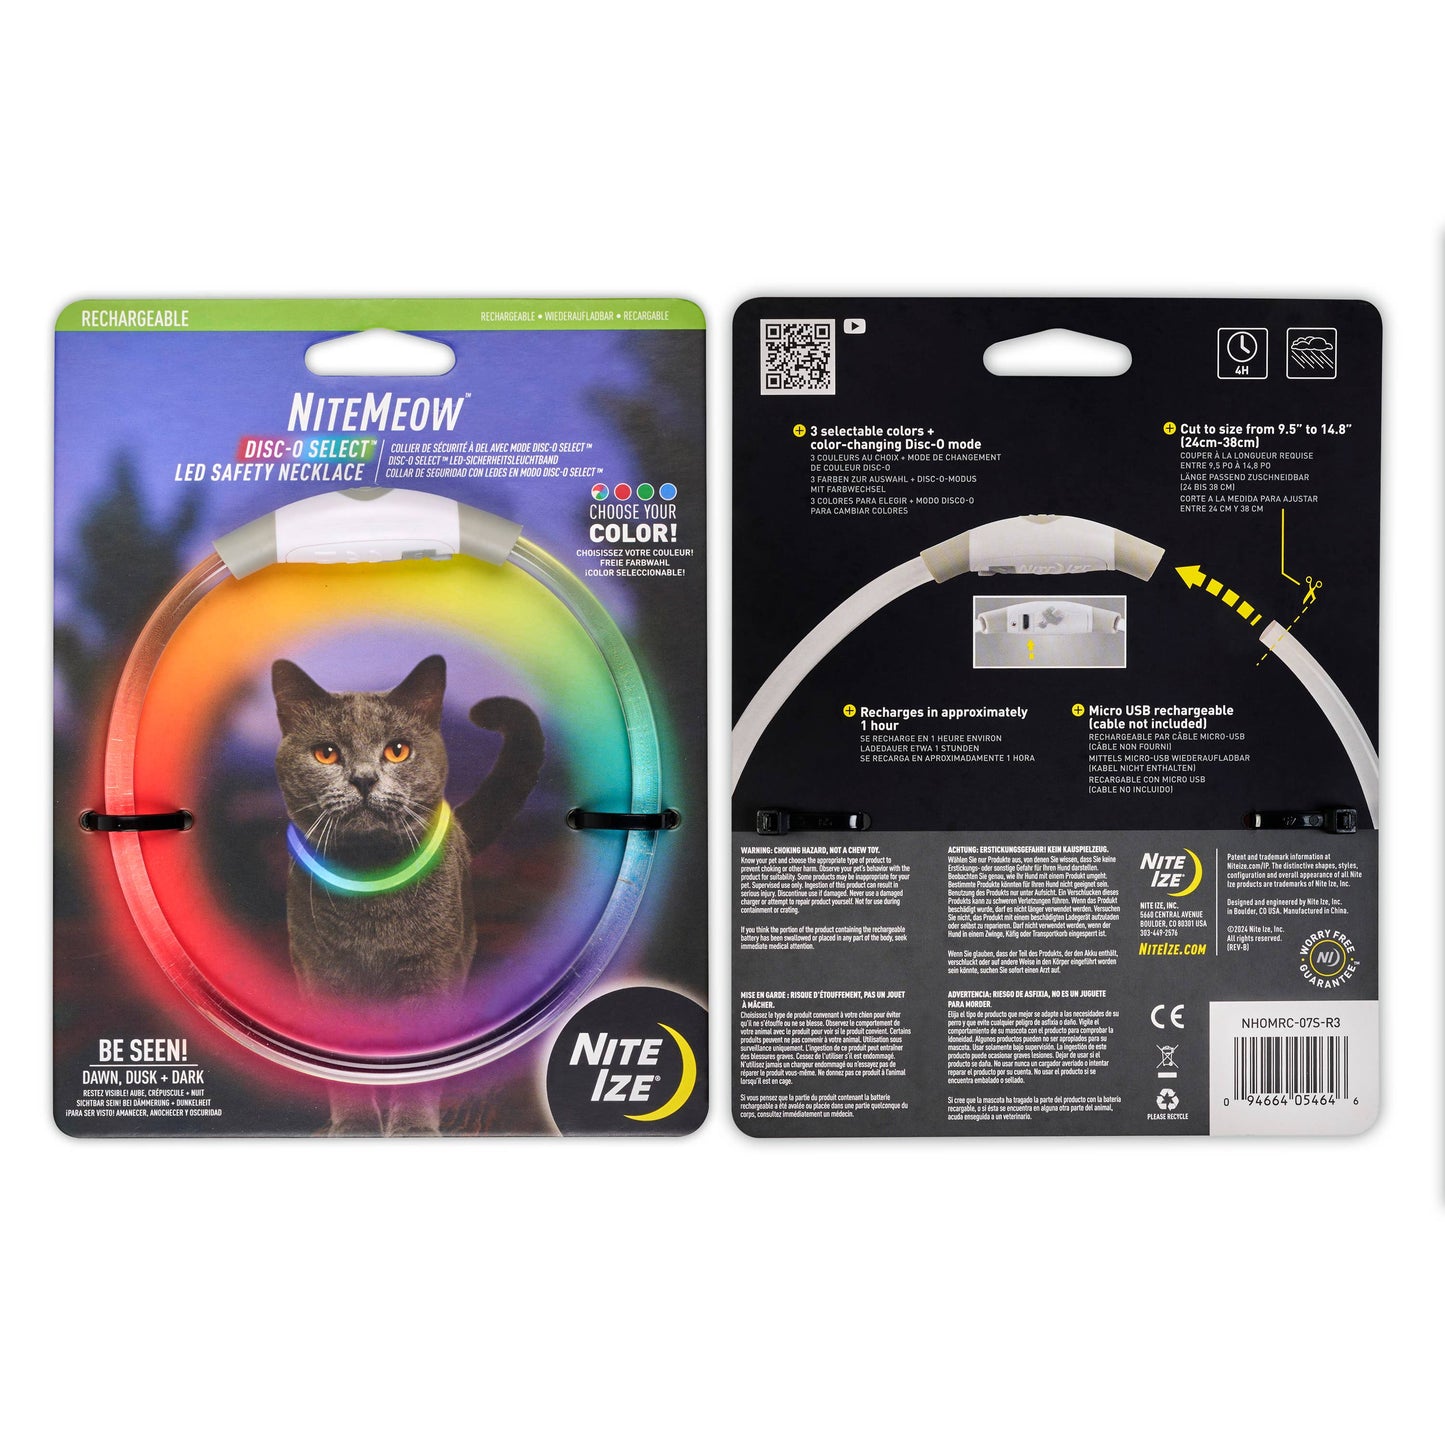 Nite Ize NiteMeow Rechargeable LED Safety Necklace Disc-O